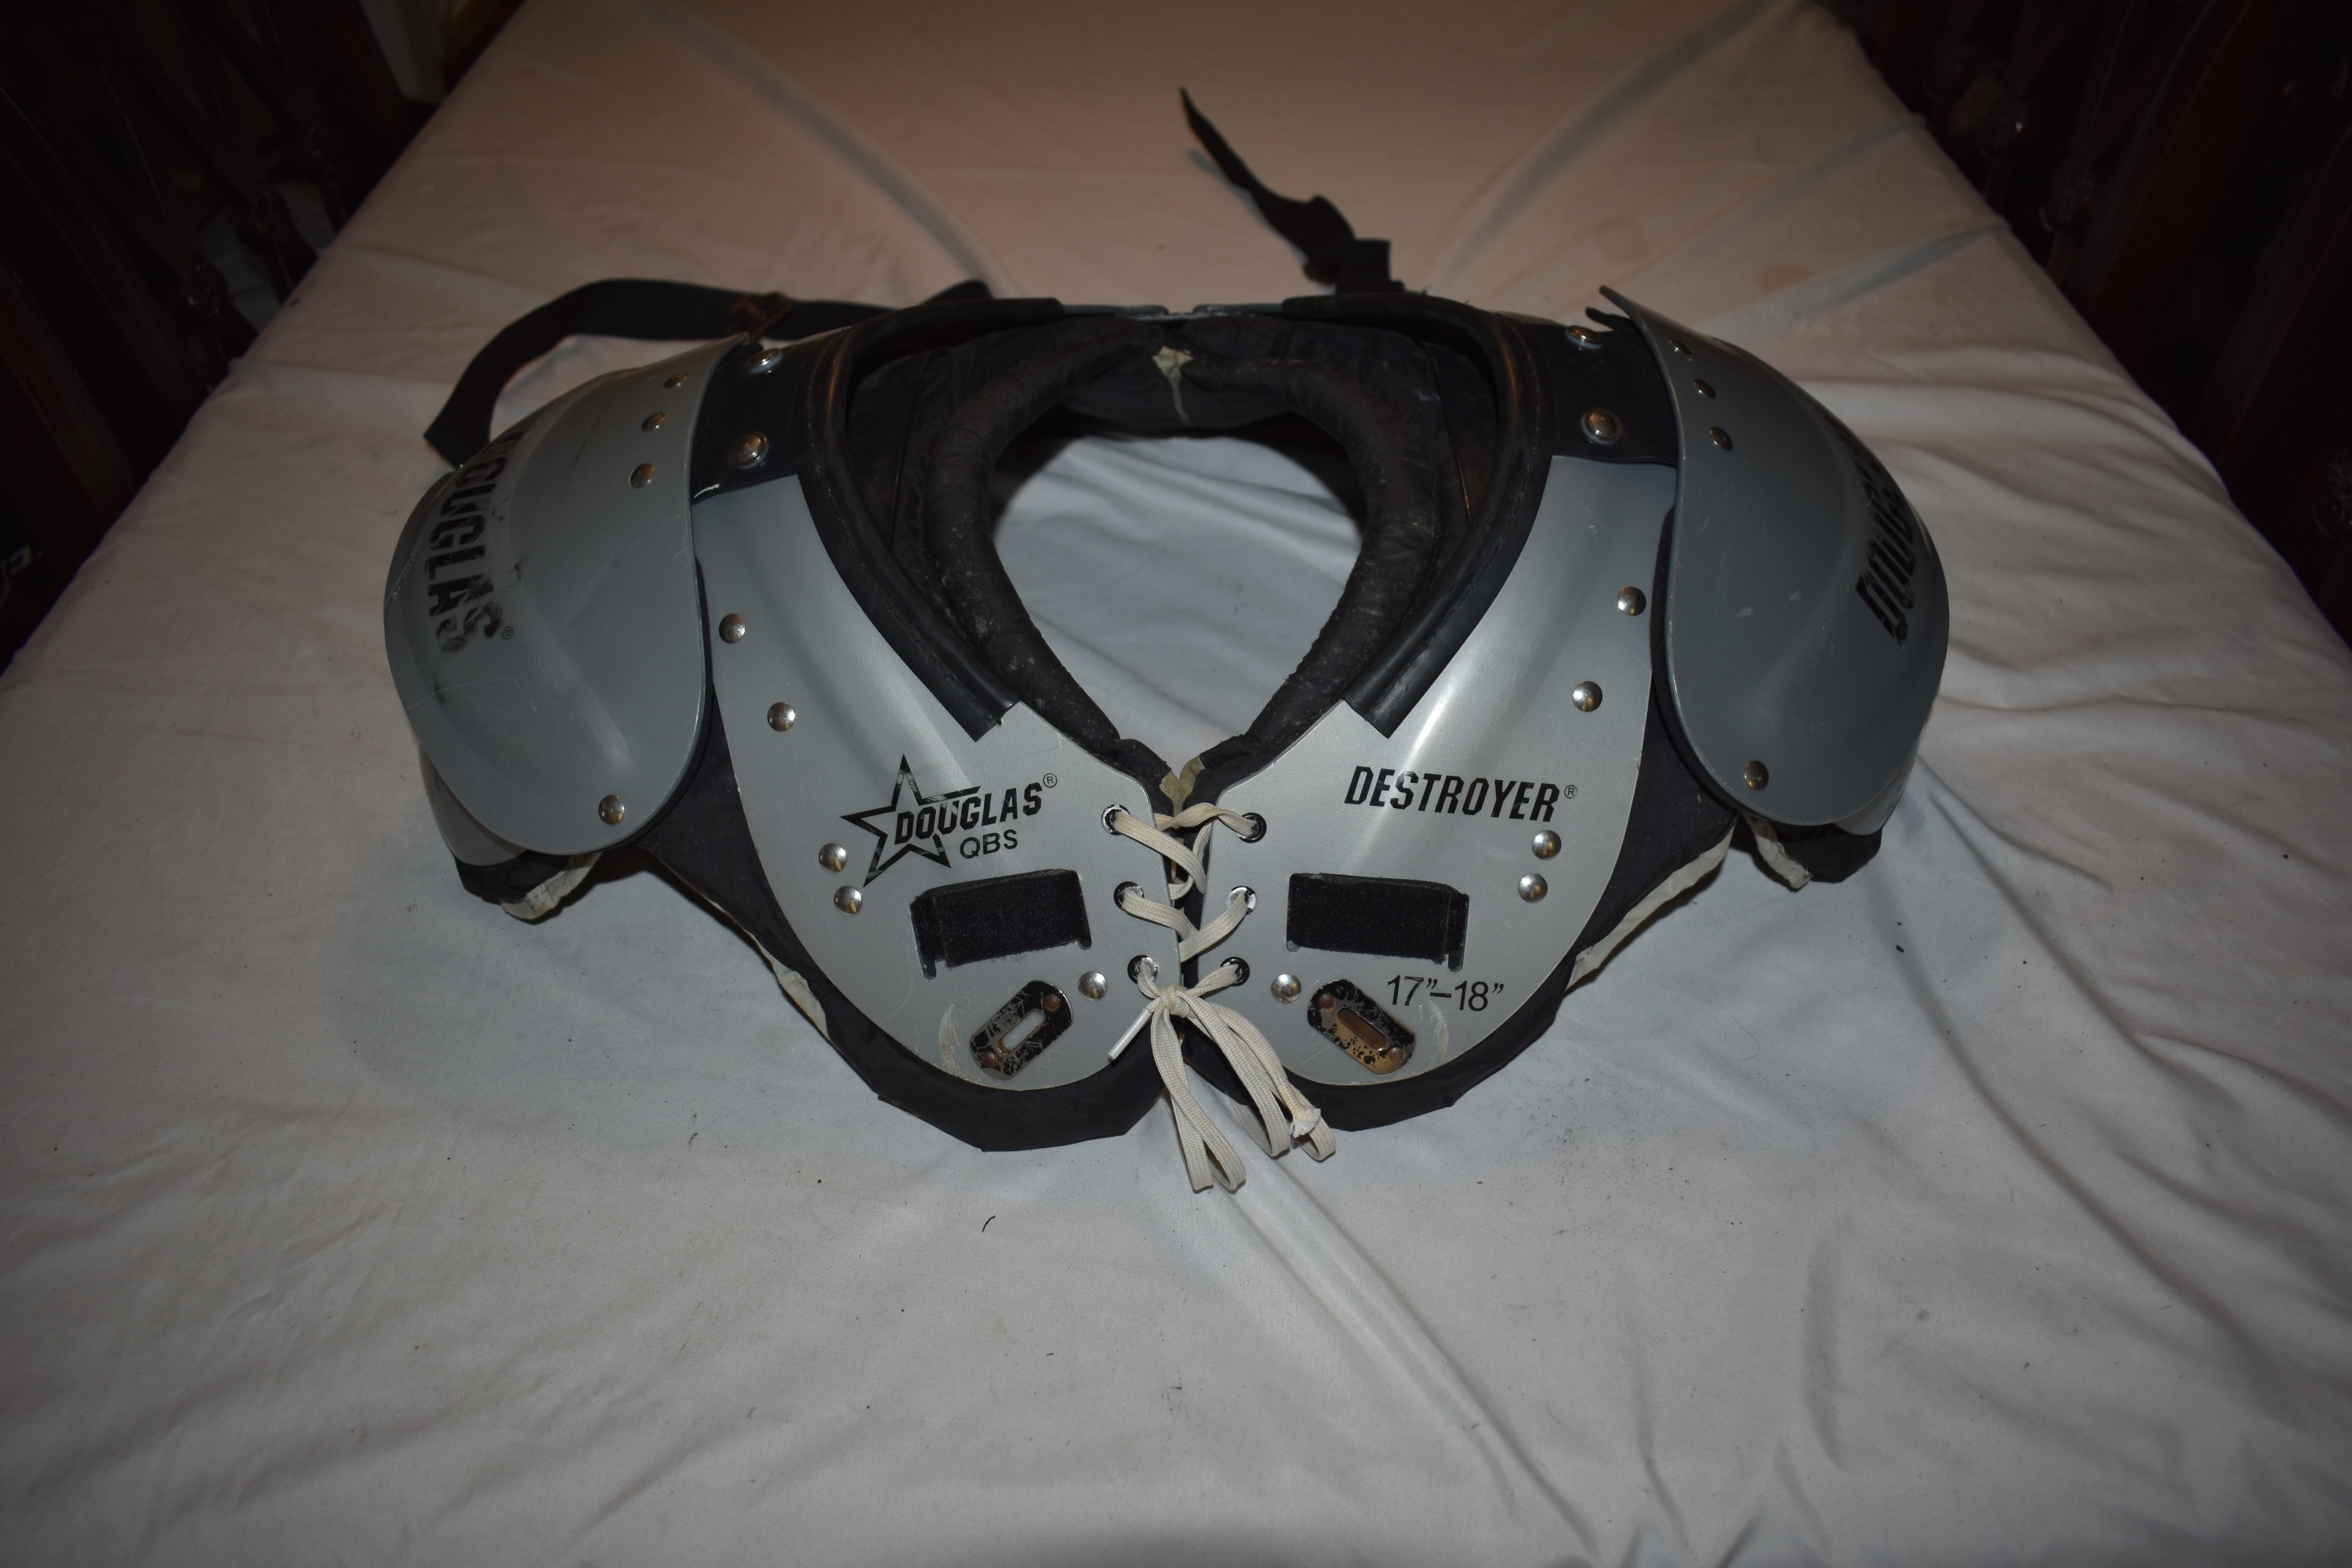 Douglas Destroyer QBS Football Shoulder Pads, Small (17-18")